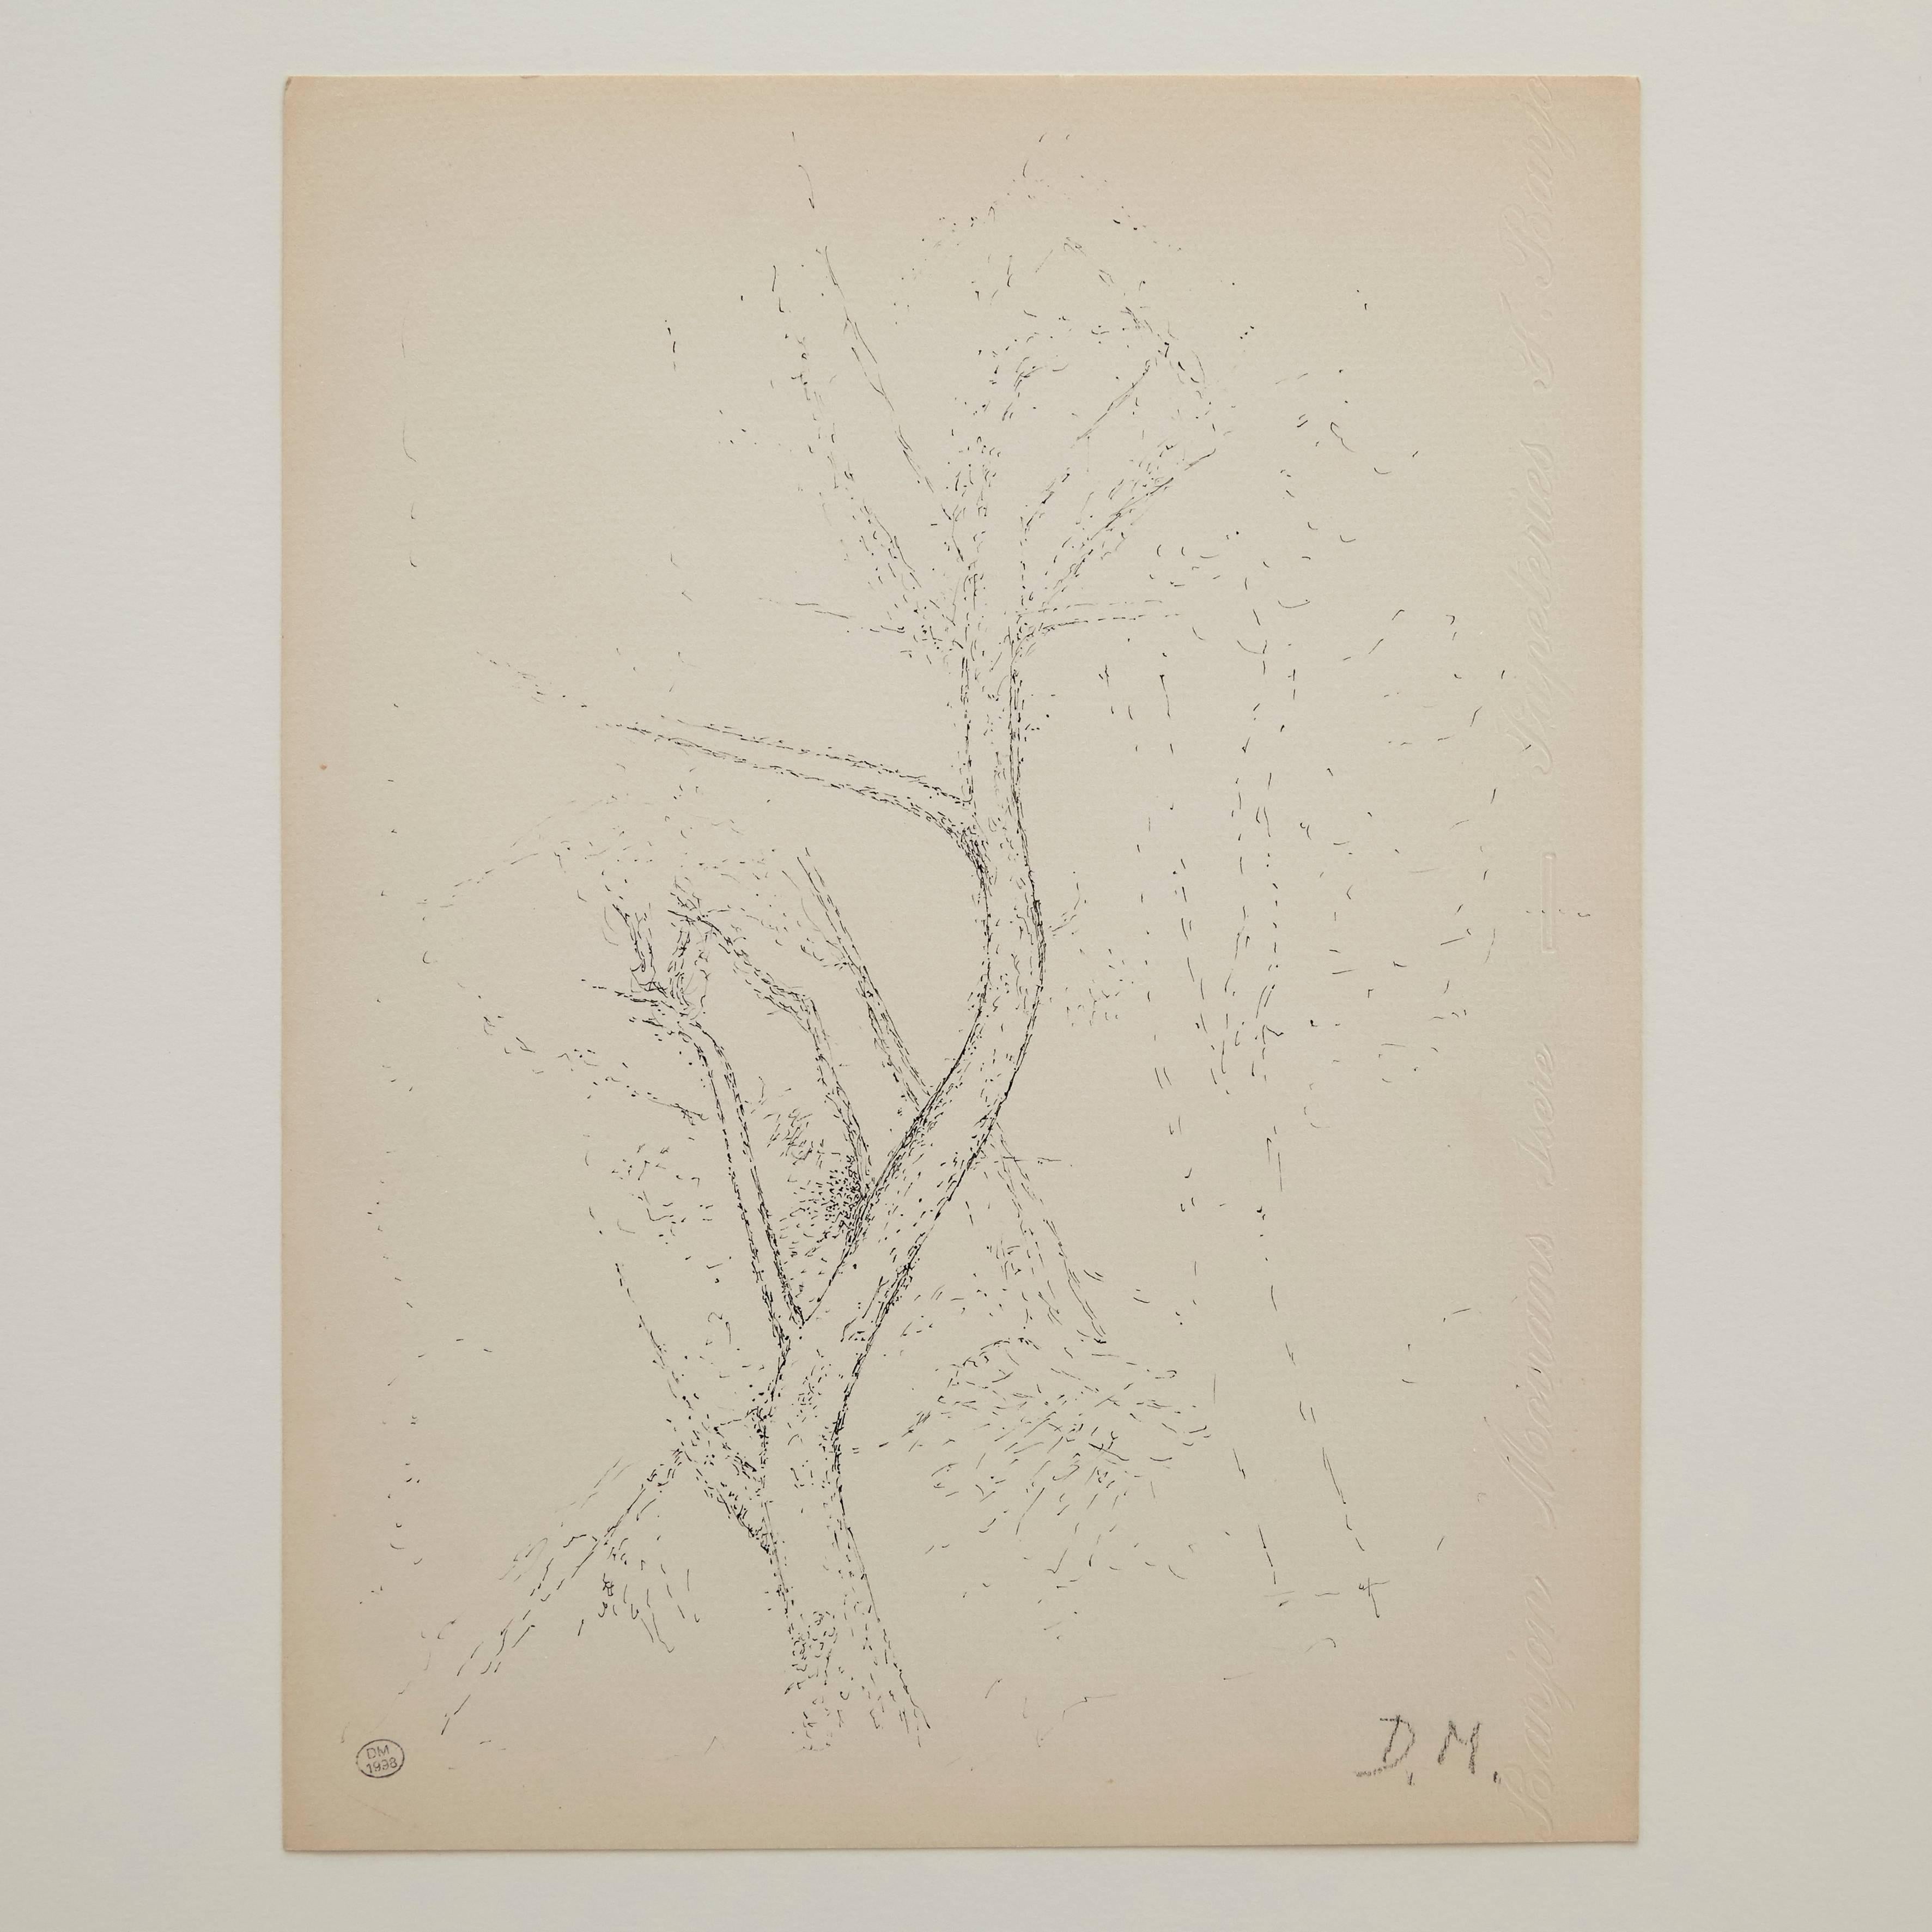 Pointillist composition by Dora Maar.

Authenticity stamp of the auction that took place in 1998 in Paris.
Black ink on cream white paper.
20th century, undated.
Frame not included.

In good original condition, with minor wear consistent with